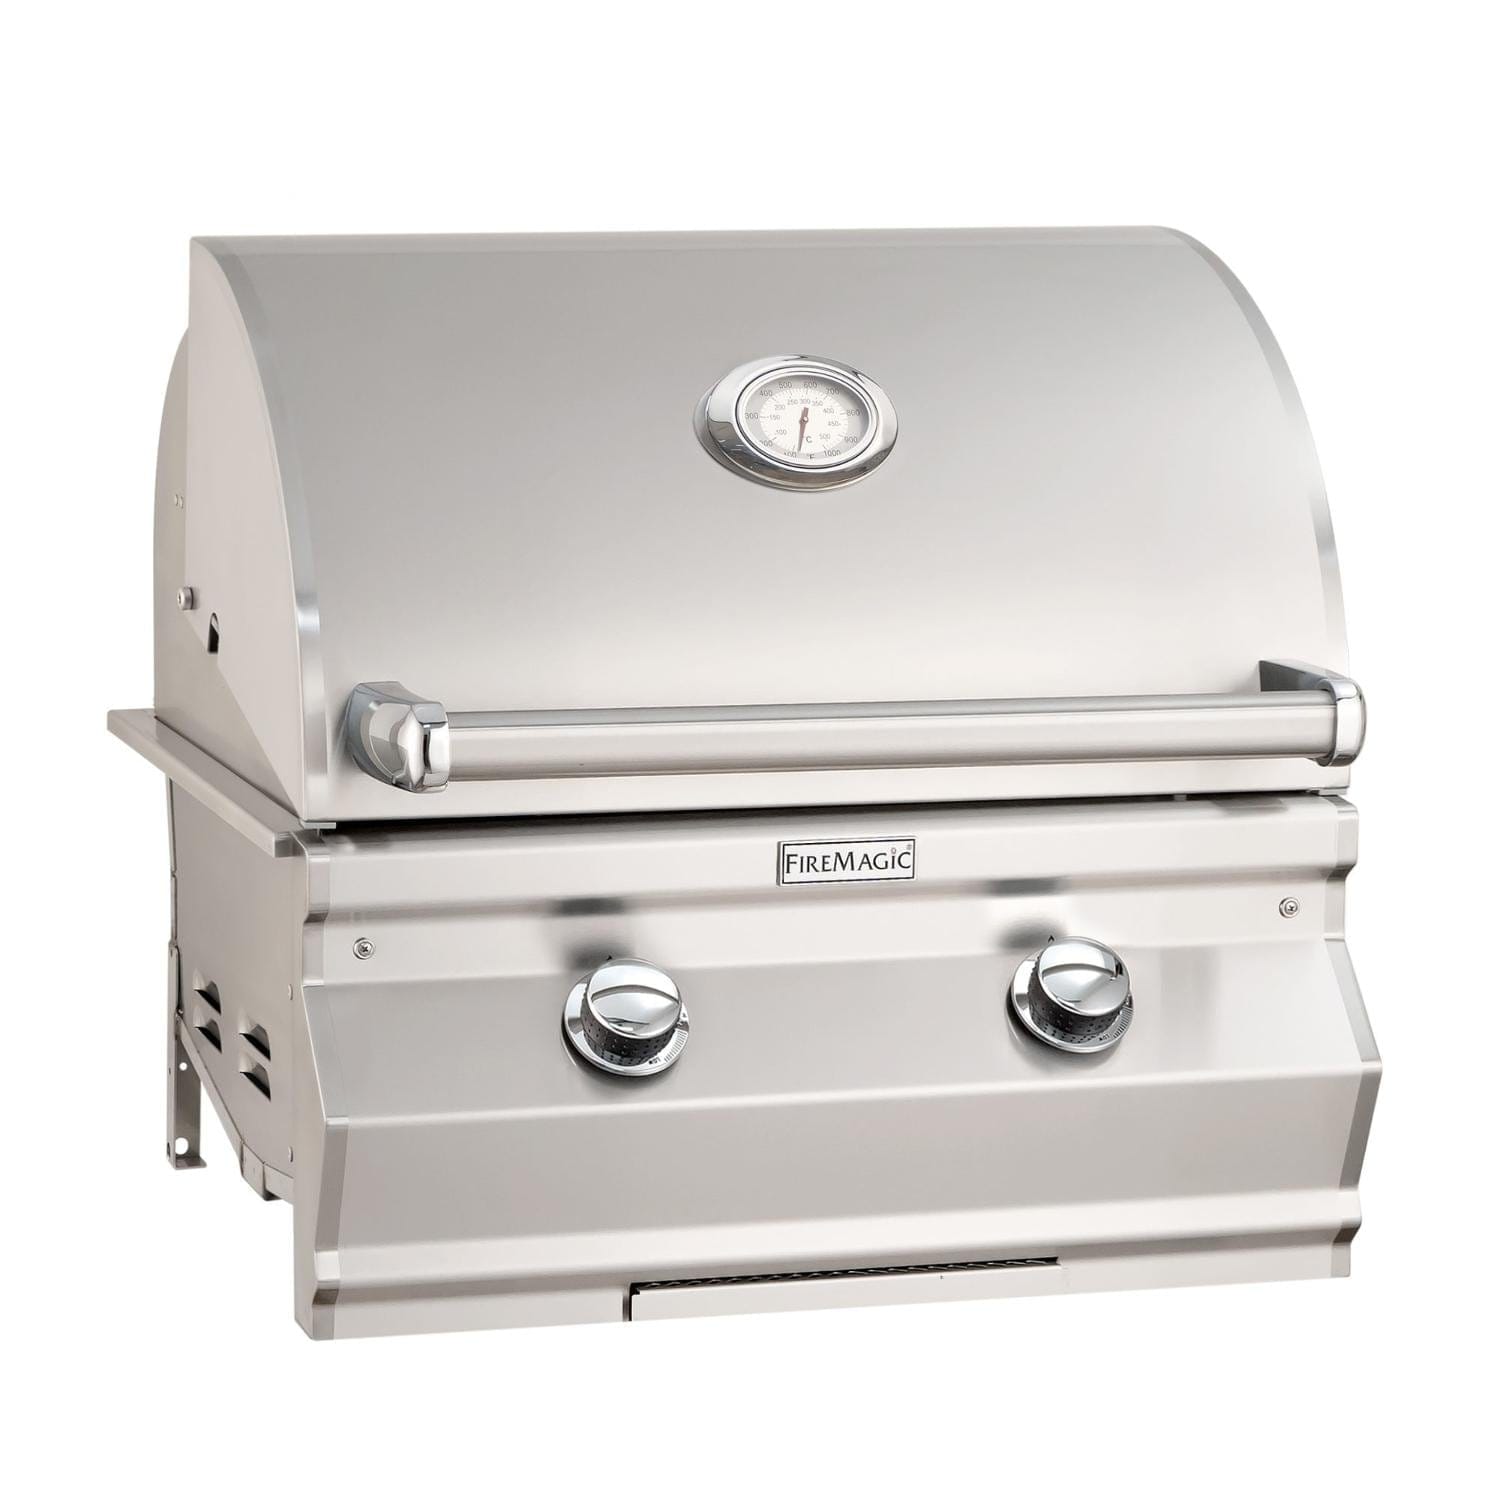 Firemagic Grills Fire Magic Choice C430I 24-Inch Built-In Gas Grill With Analog Thermometer - C430I-RT1